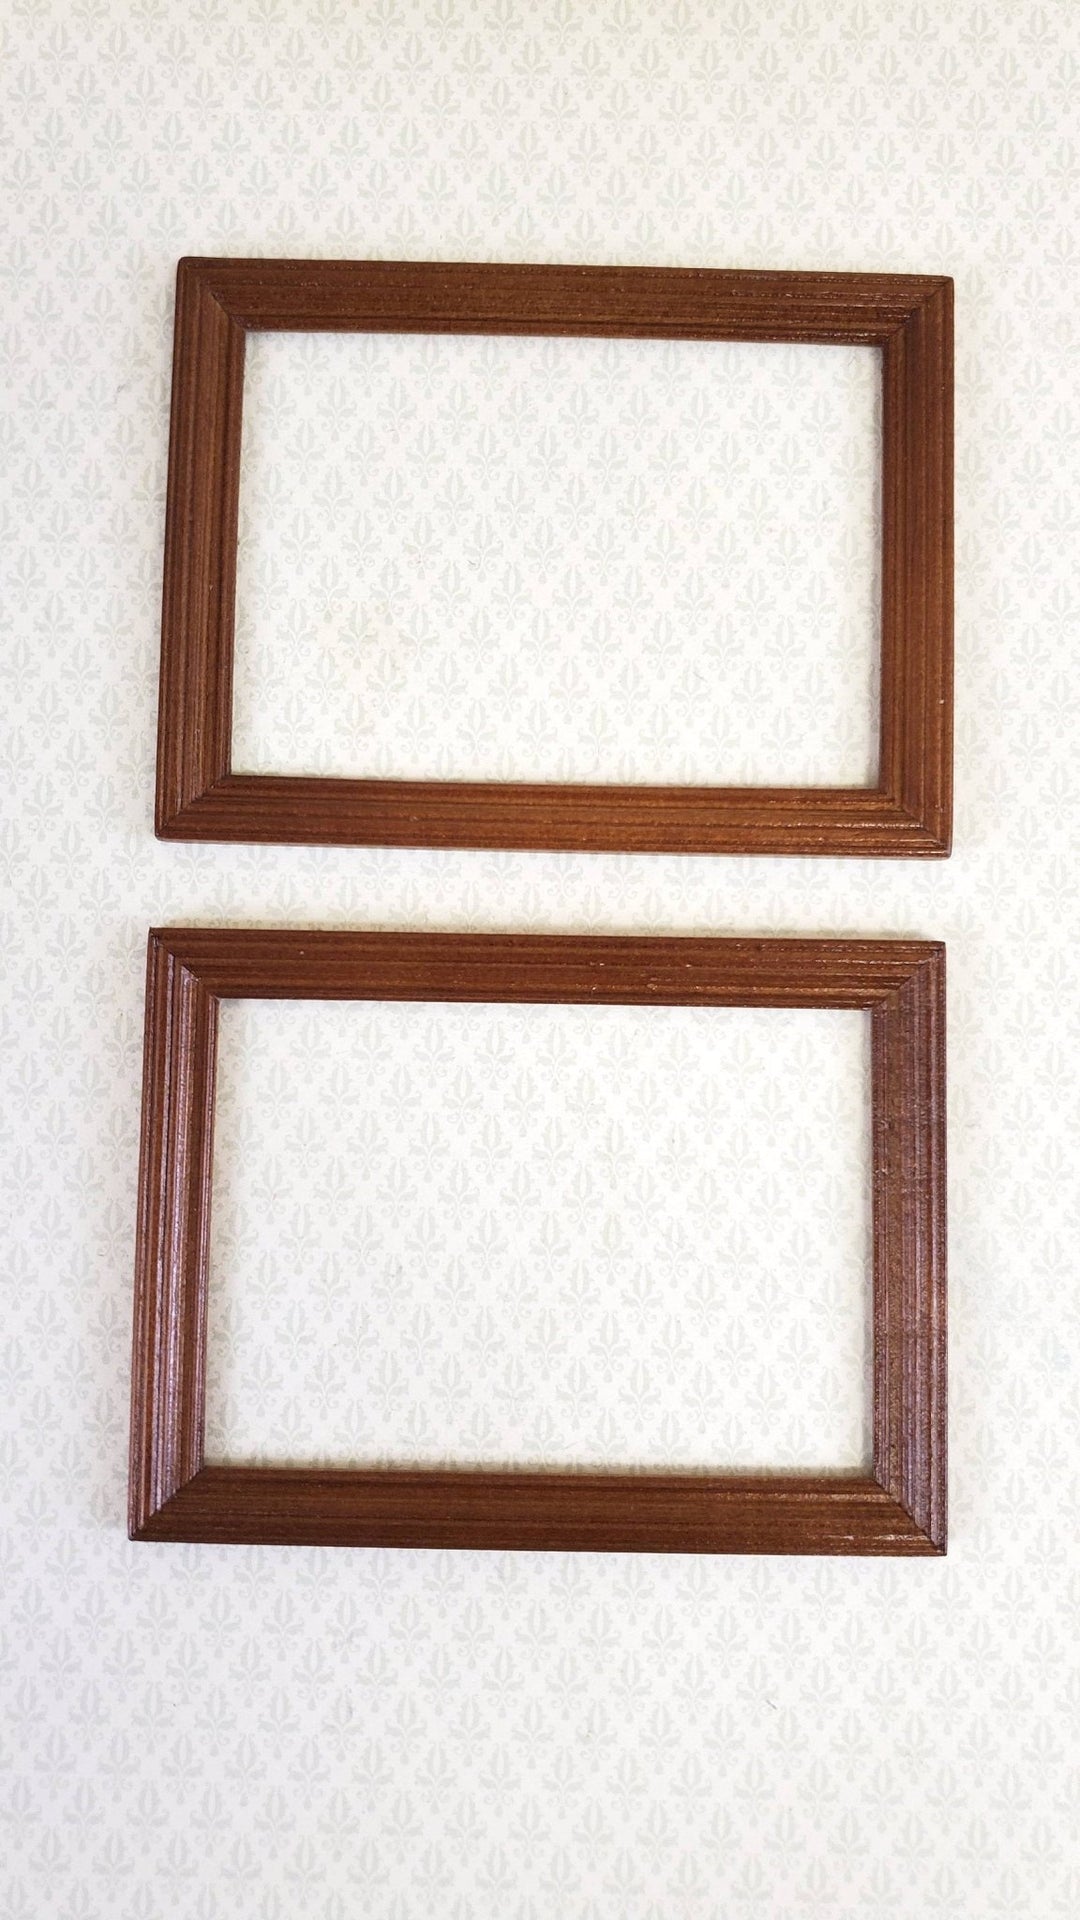 Dollhouse Miniature Picture Frame Large Walnut for Painting x2 Wood 1:12 Scale - Miniature Crush